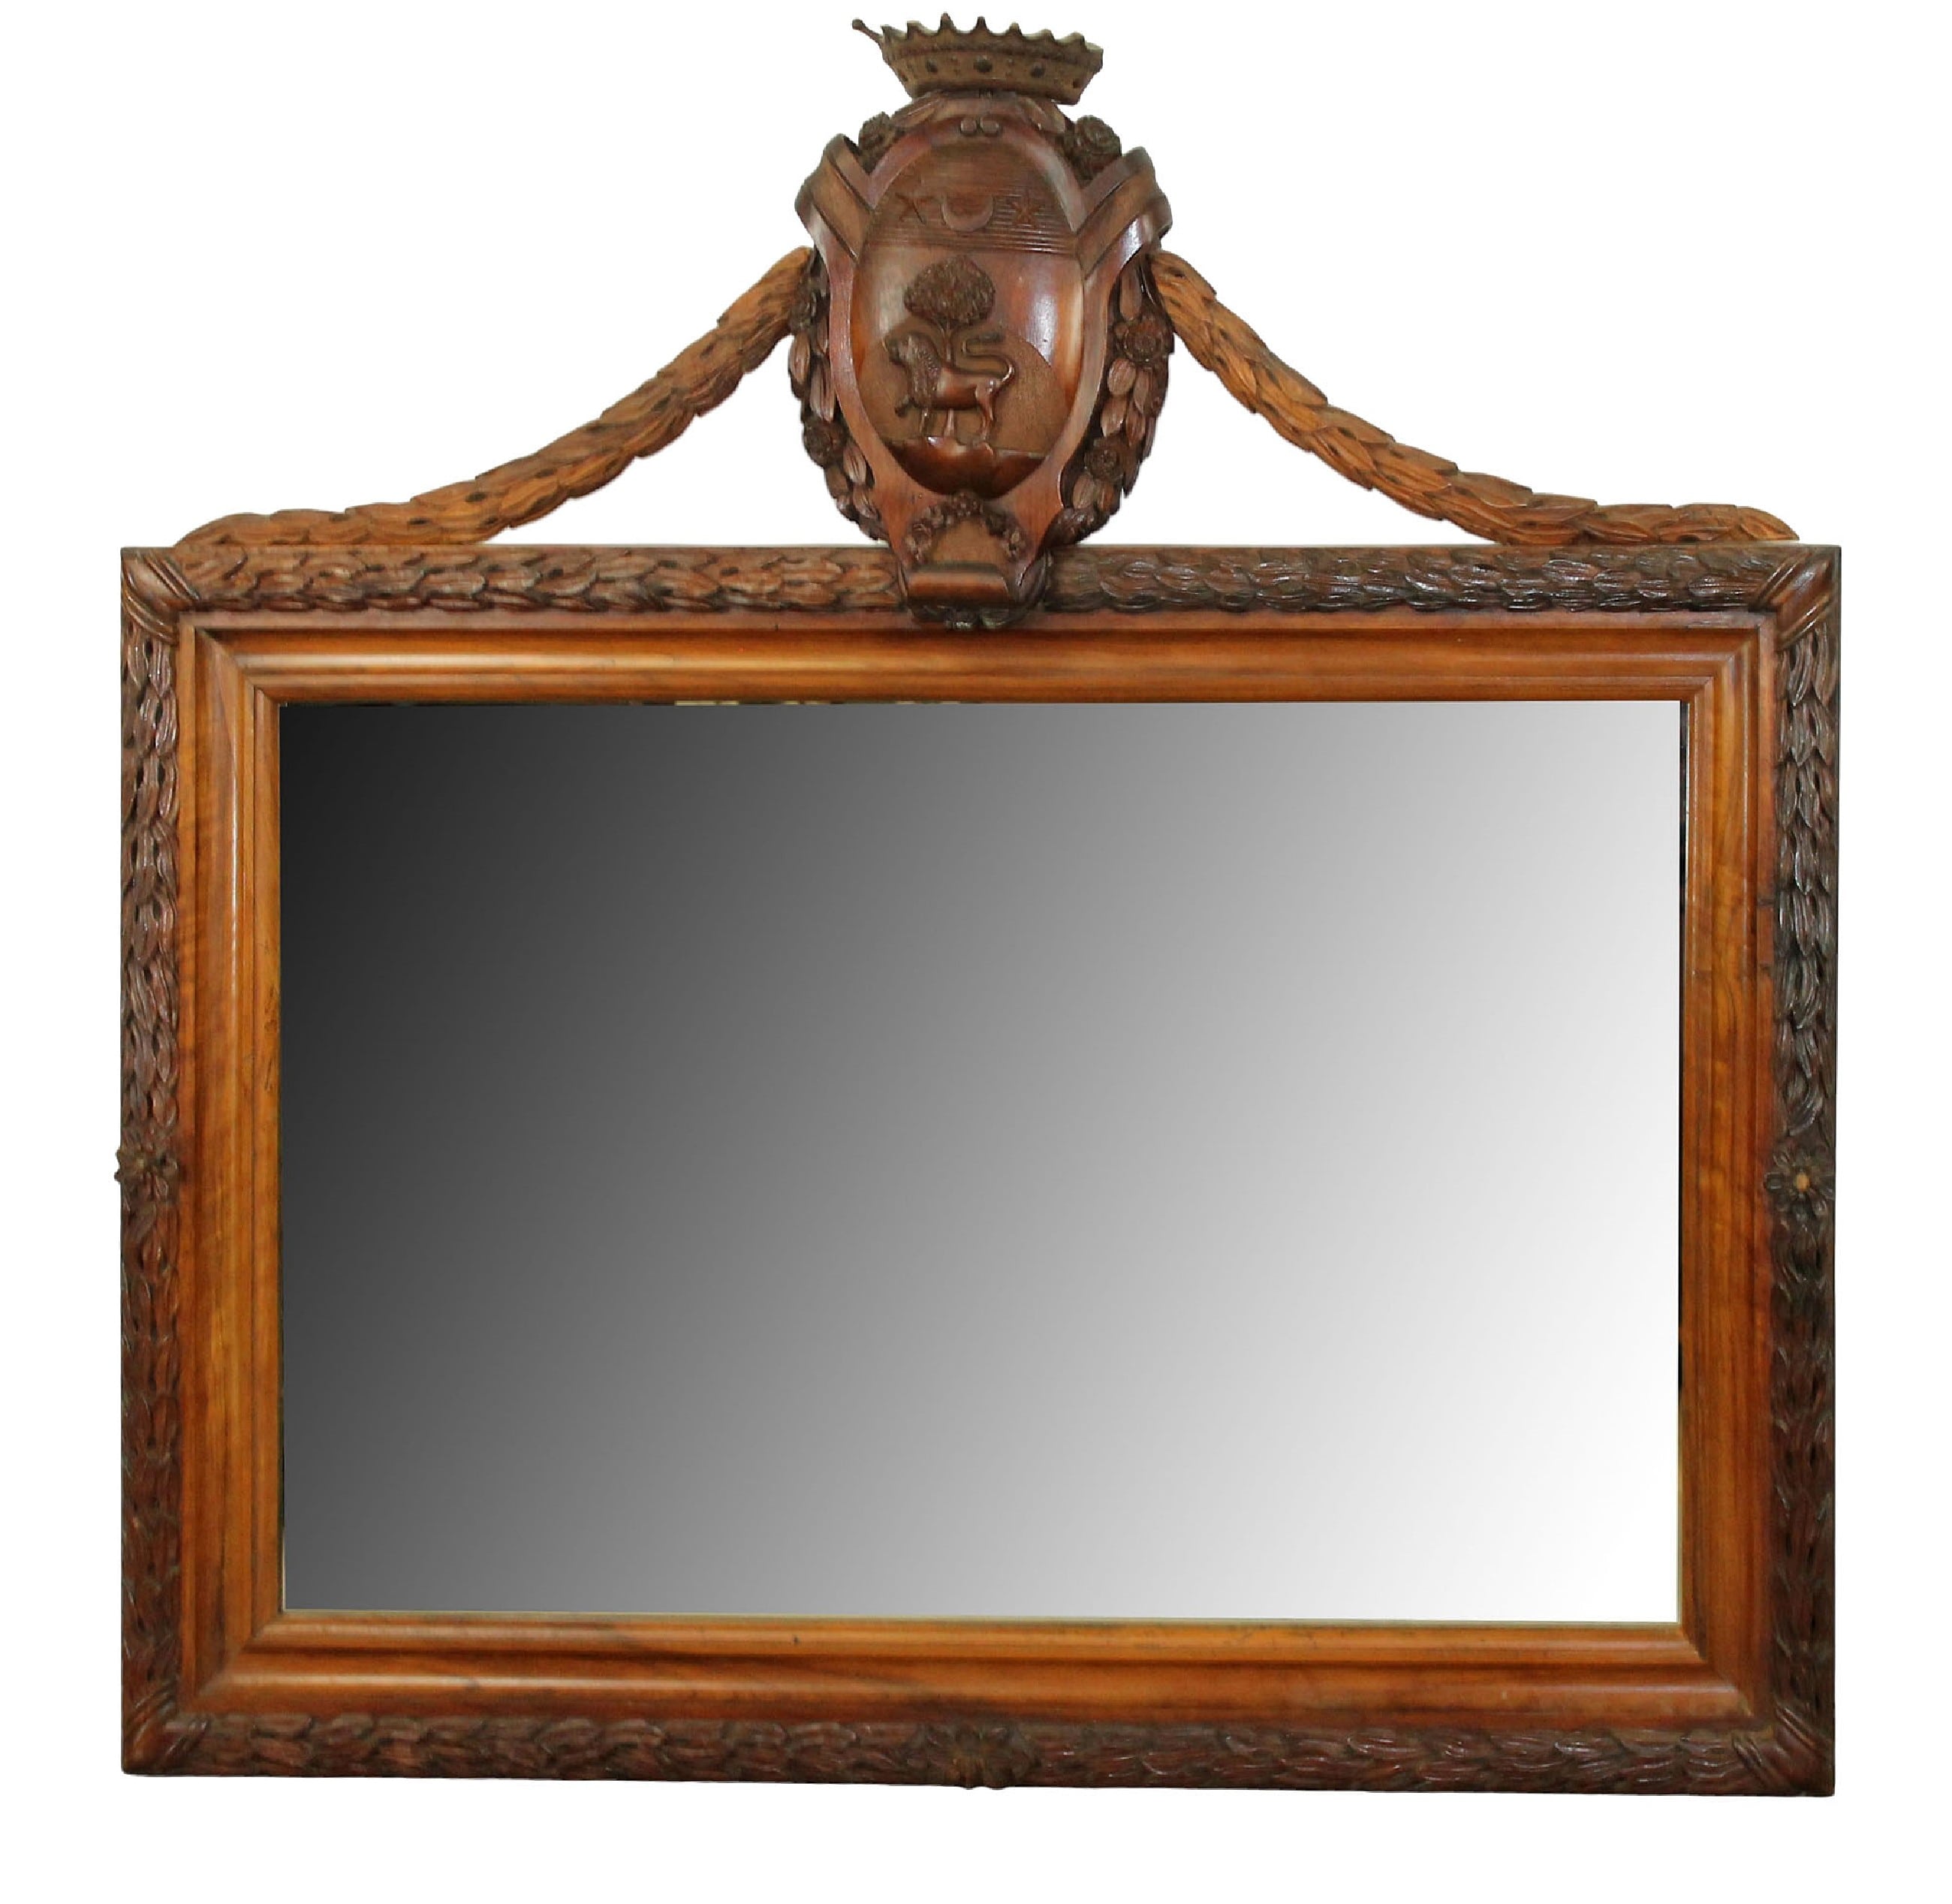 Italian carved walnut mirror with crown and crest